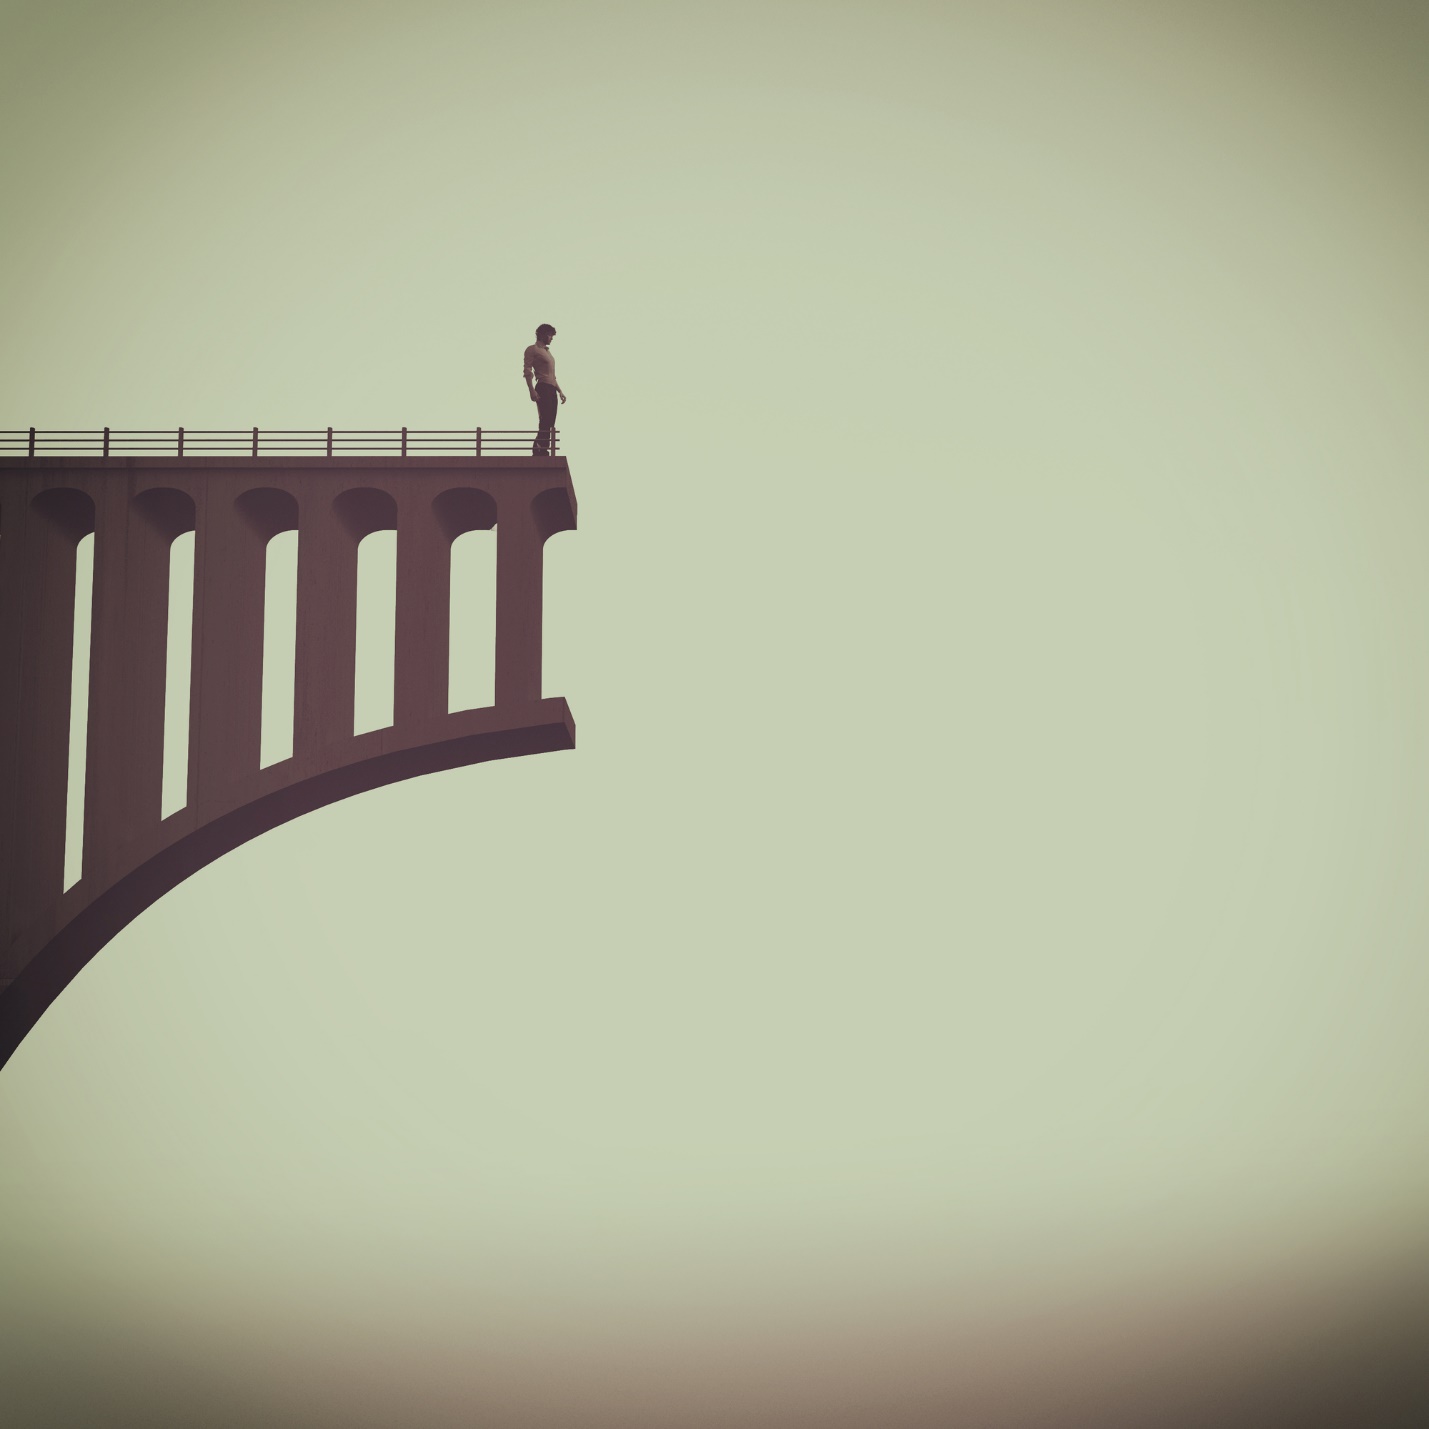 A person standing on a bridge

Description automatically generated